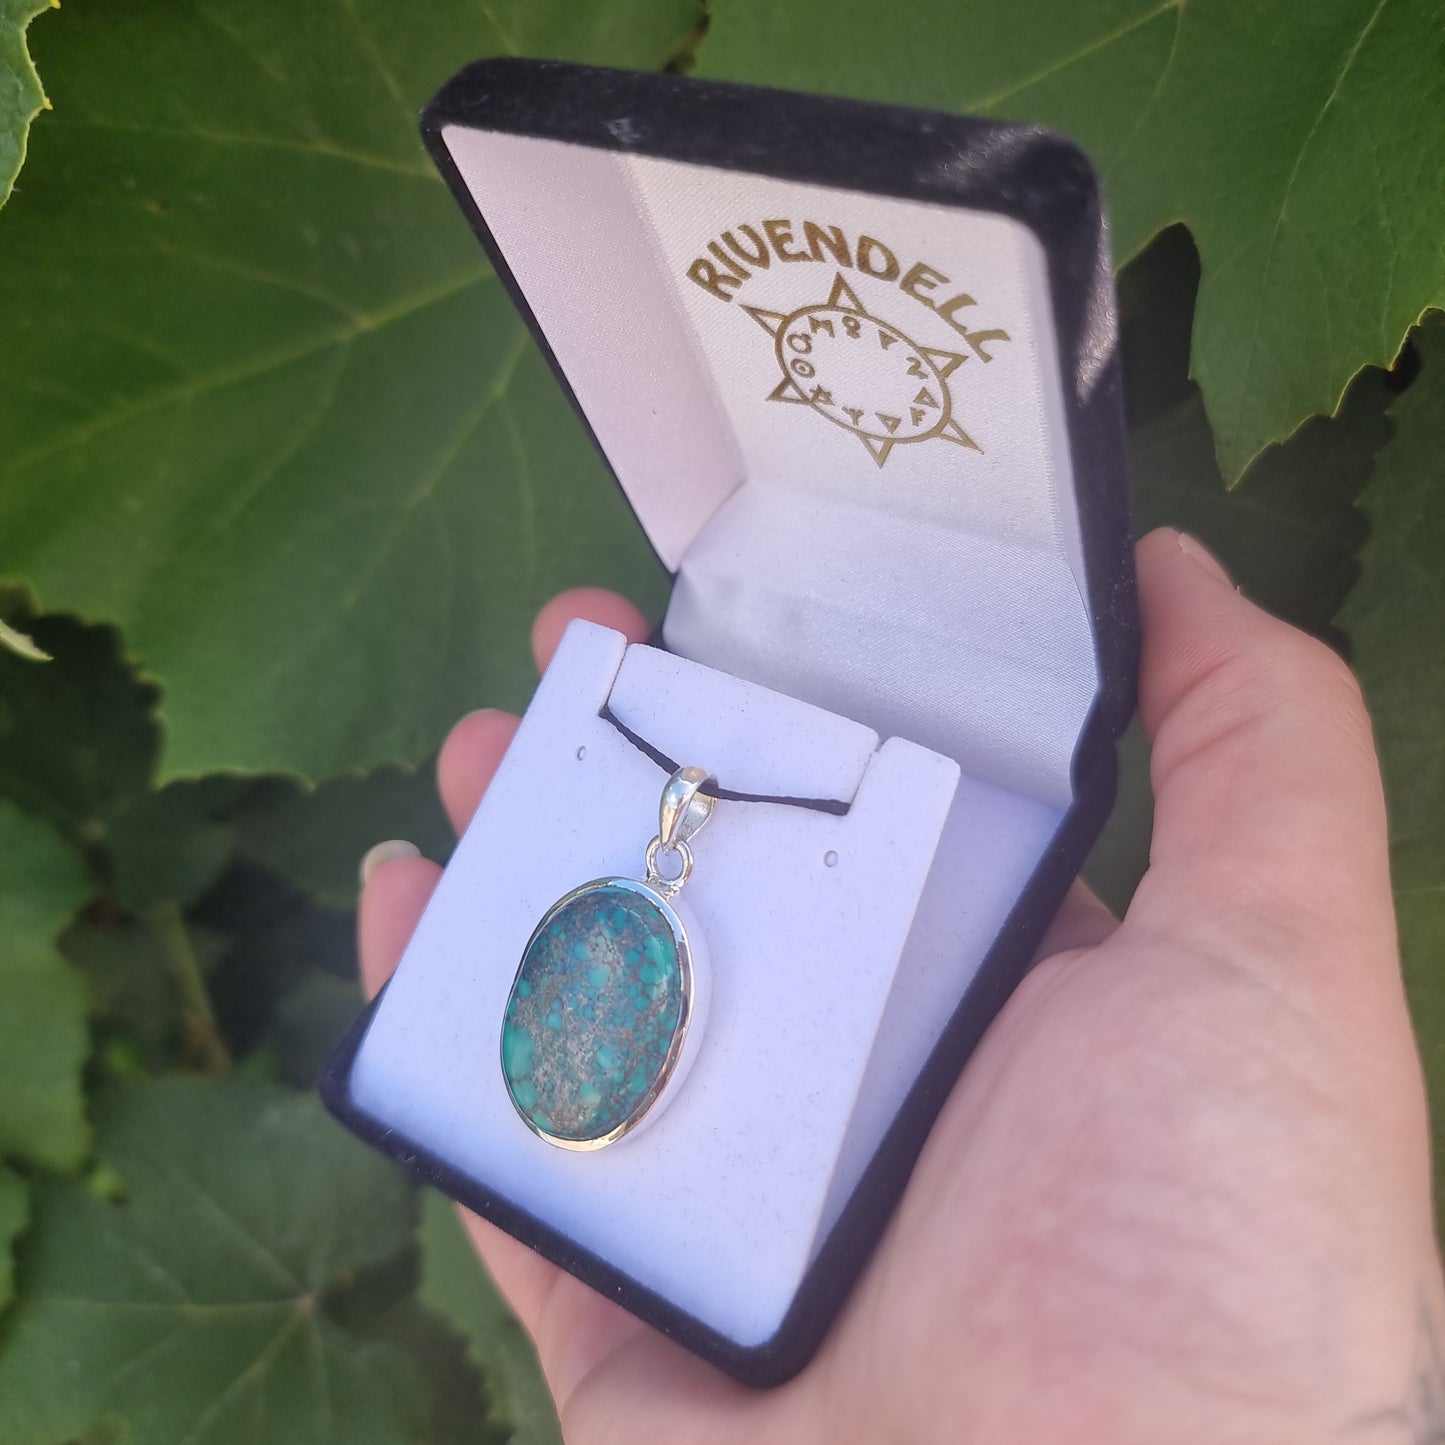 Turquoise pendant collection - Rivendell Shop